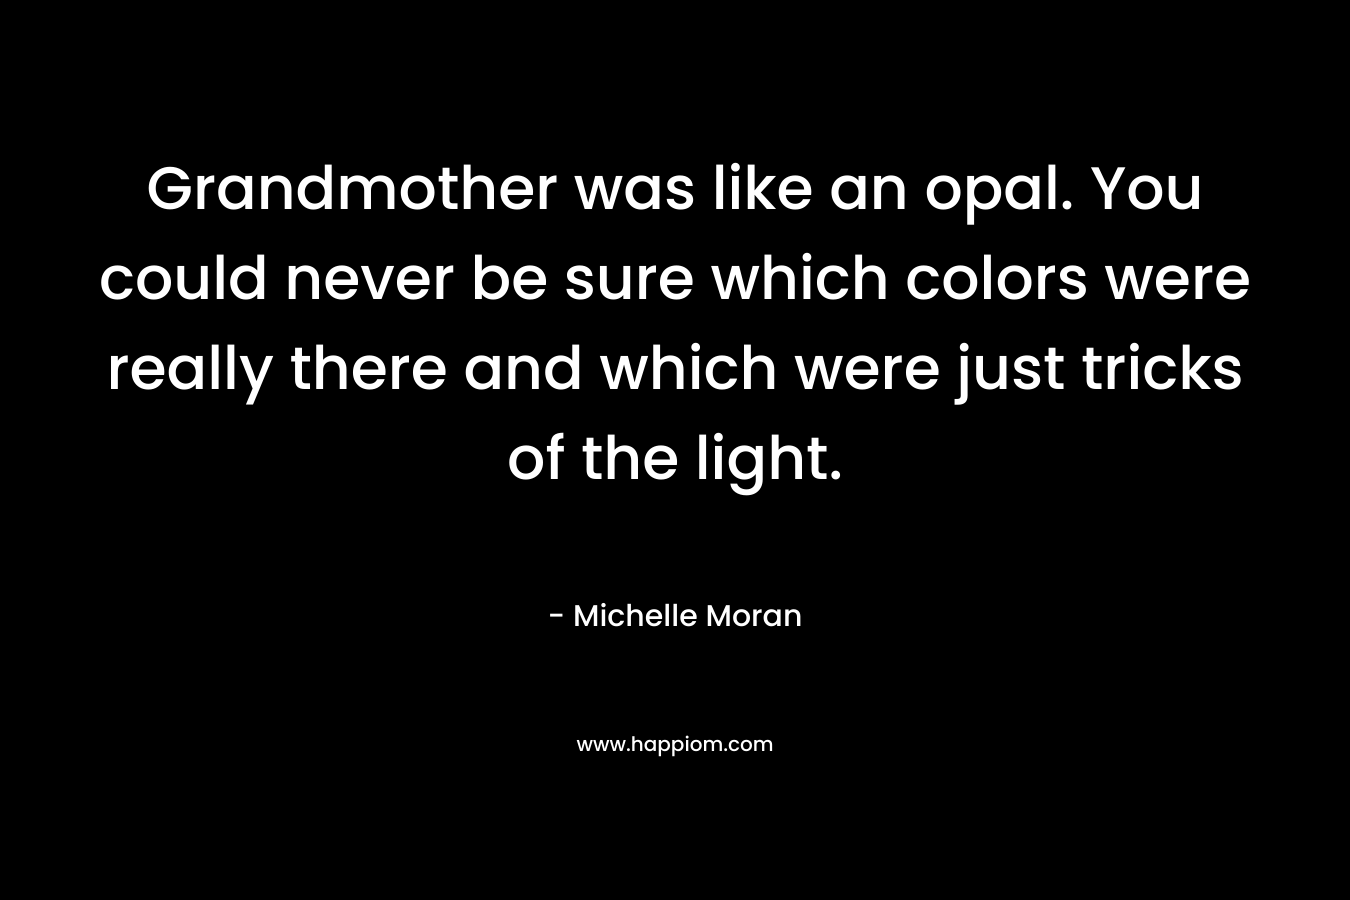 Grandmother was like an opal. You could never be sure which colors were really there and which were just tricks of the light. – Michelle Moran